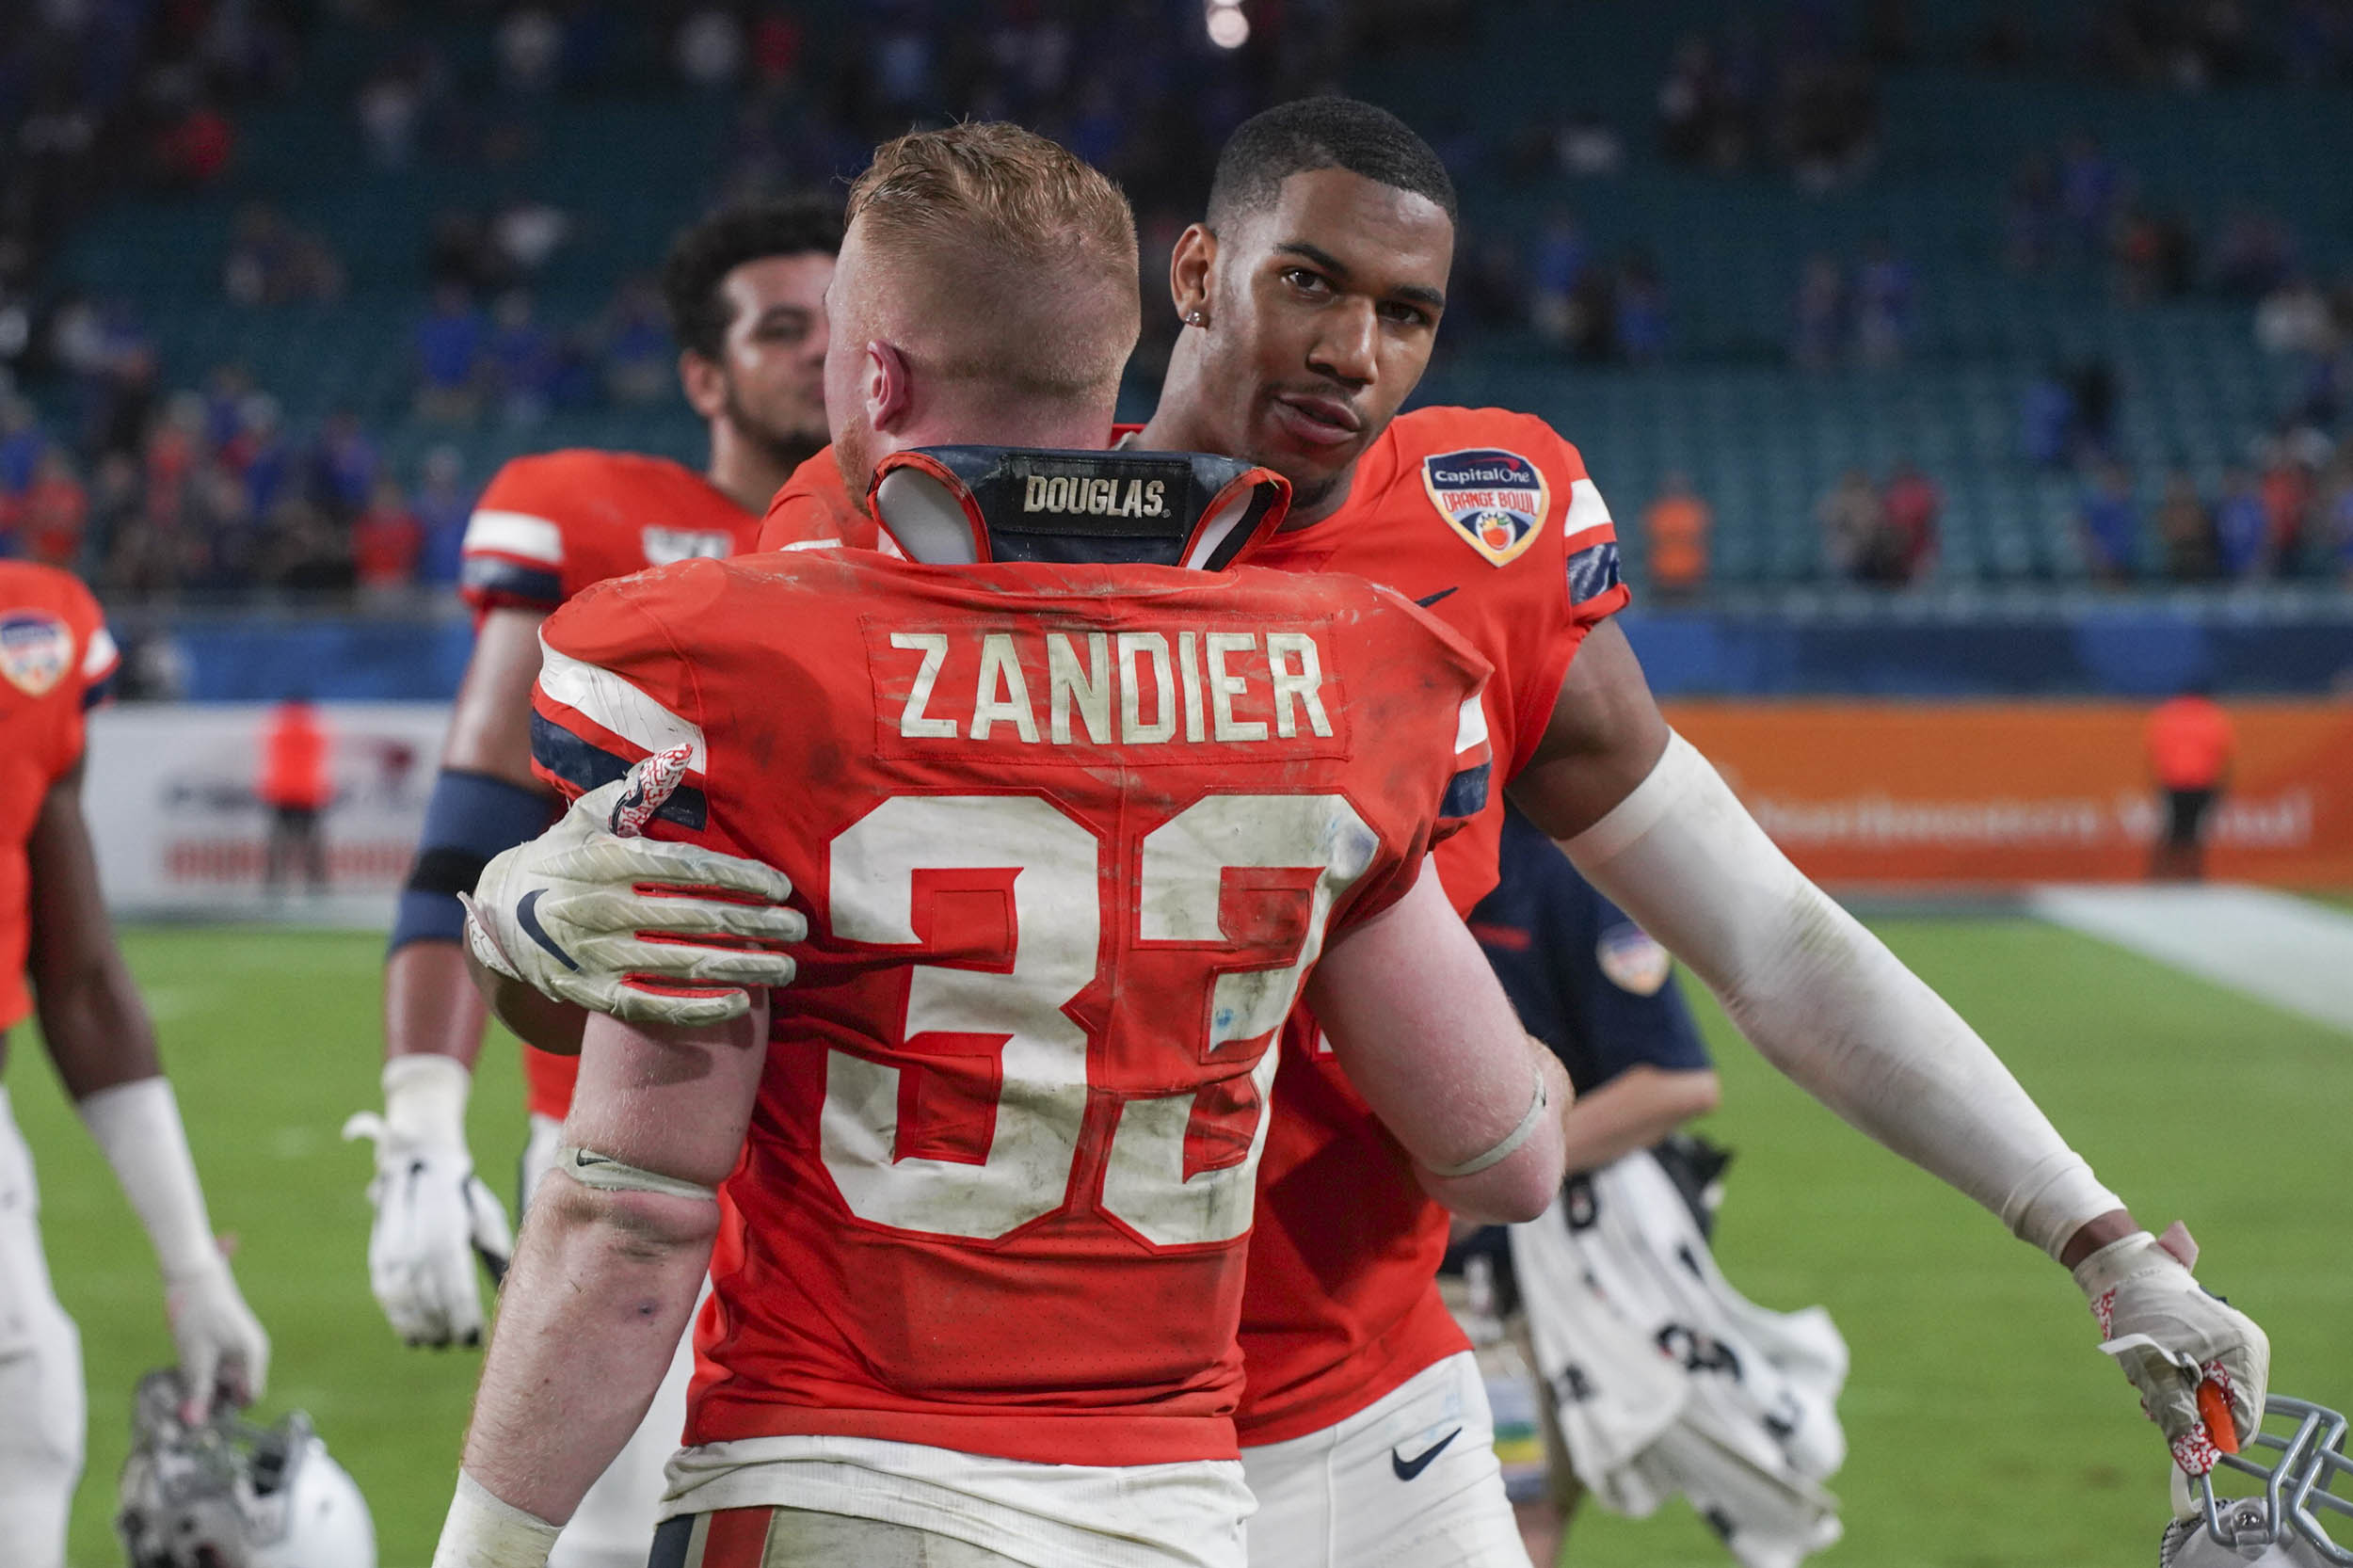 Zandier and teammate Charles Snowden share a hug after the game